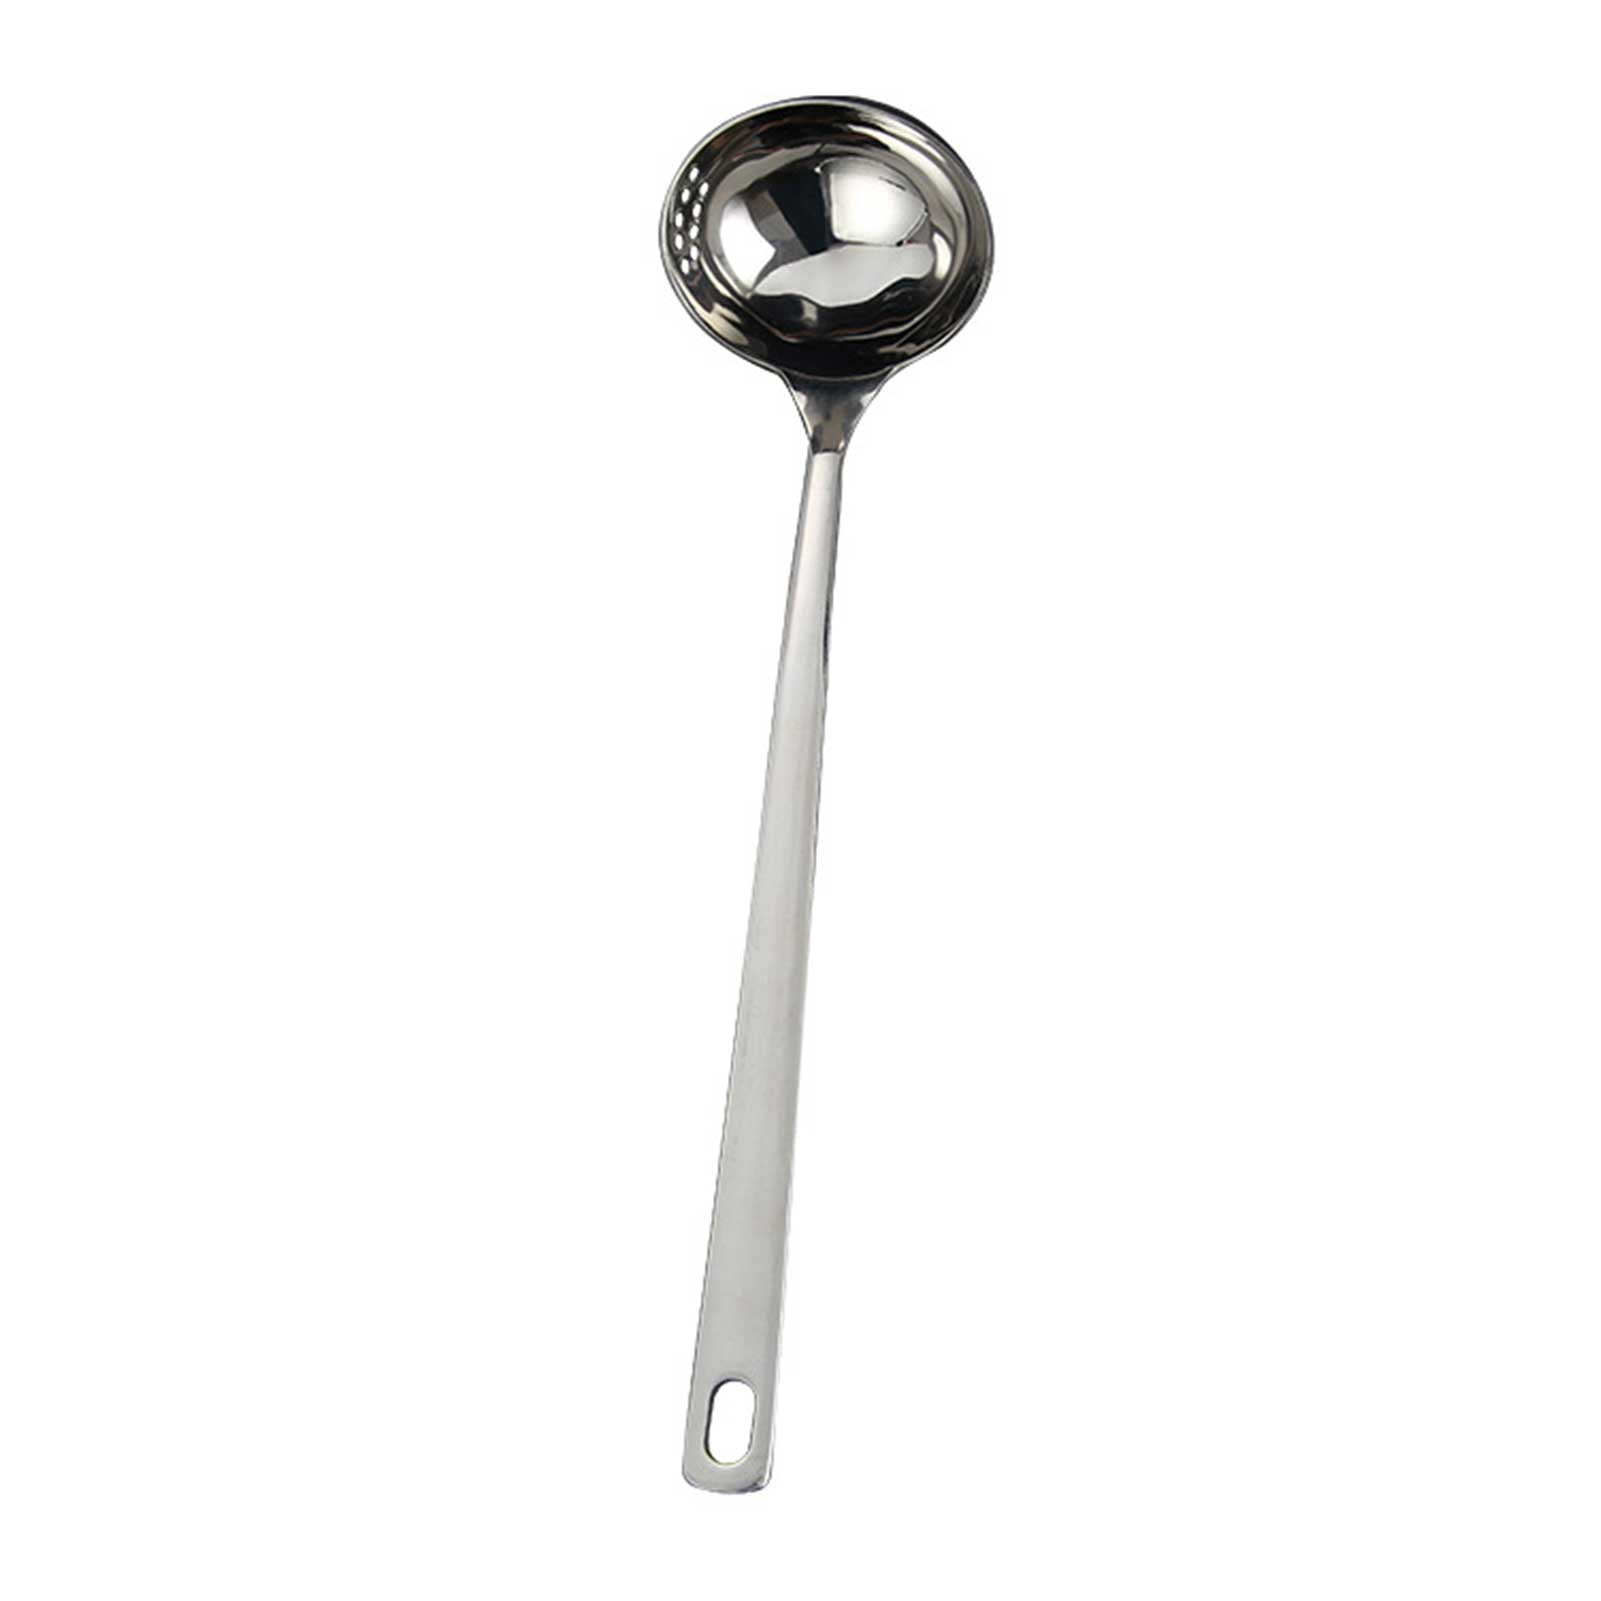 Long Handle Soup Ladle Spoon Stainless Steel spoon Kitchen Utensils NEW